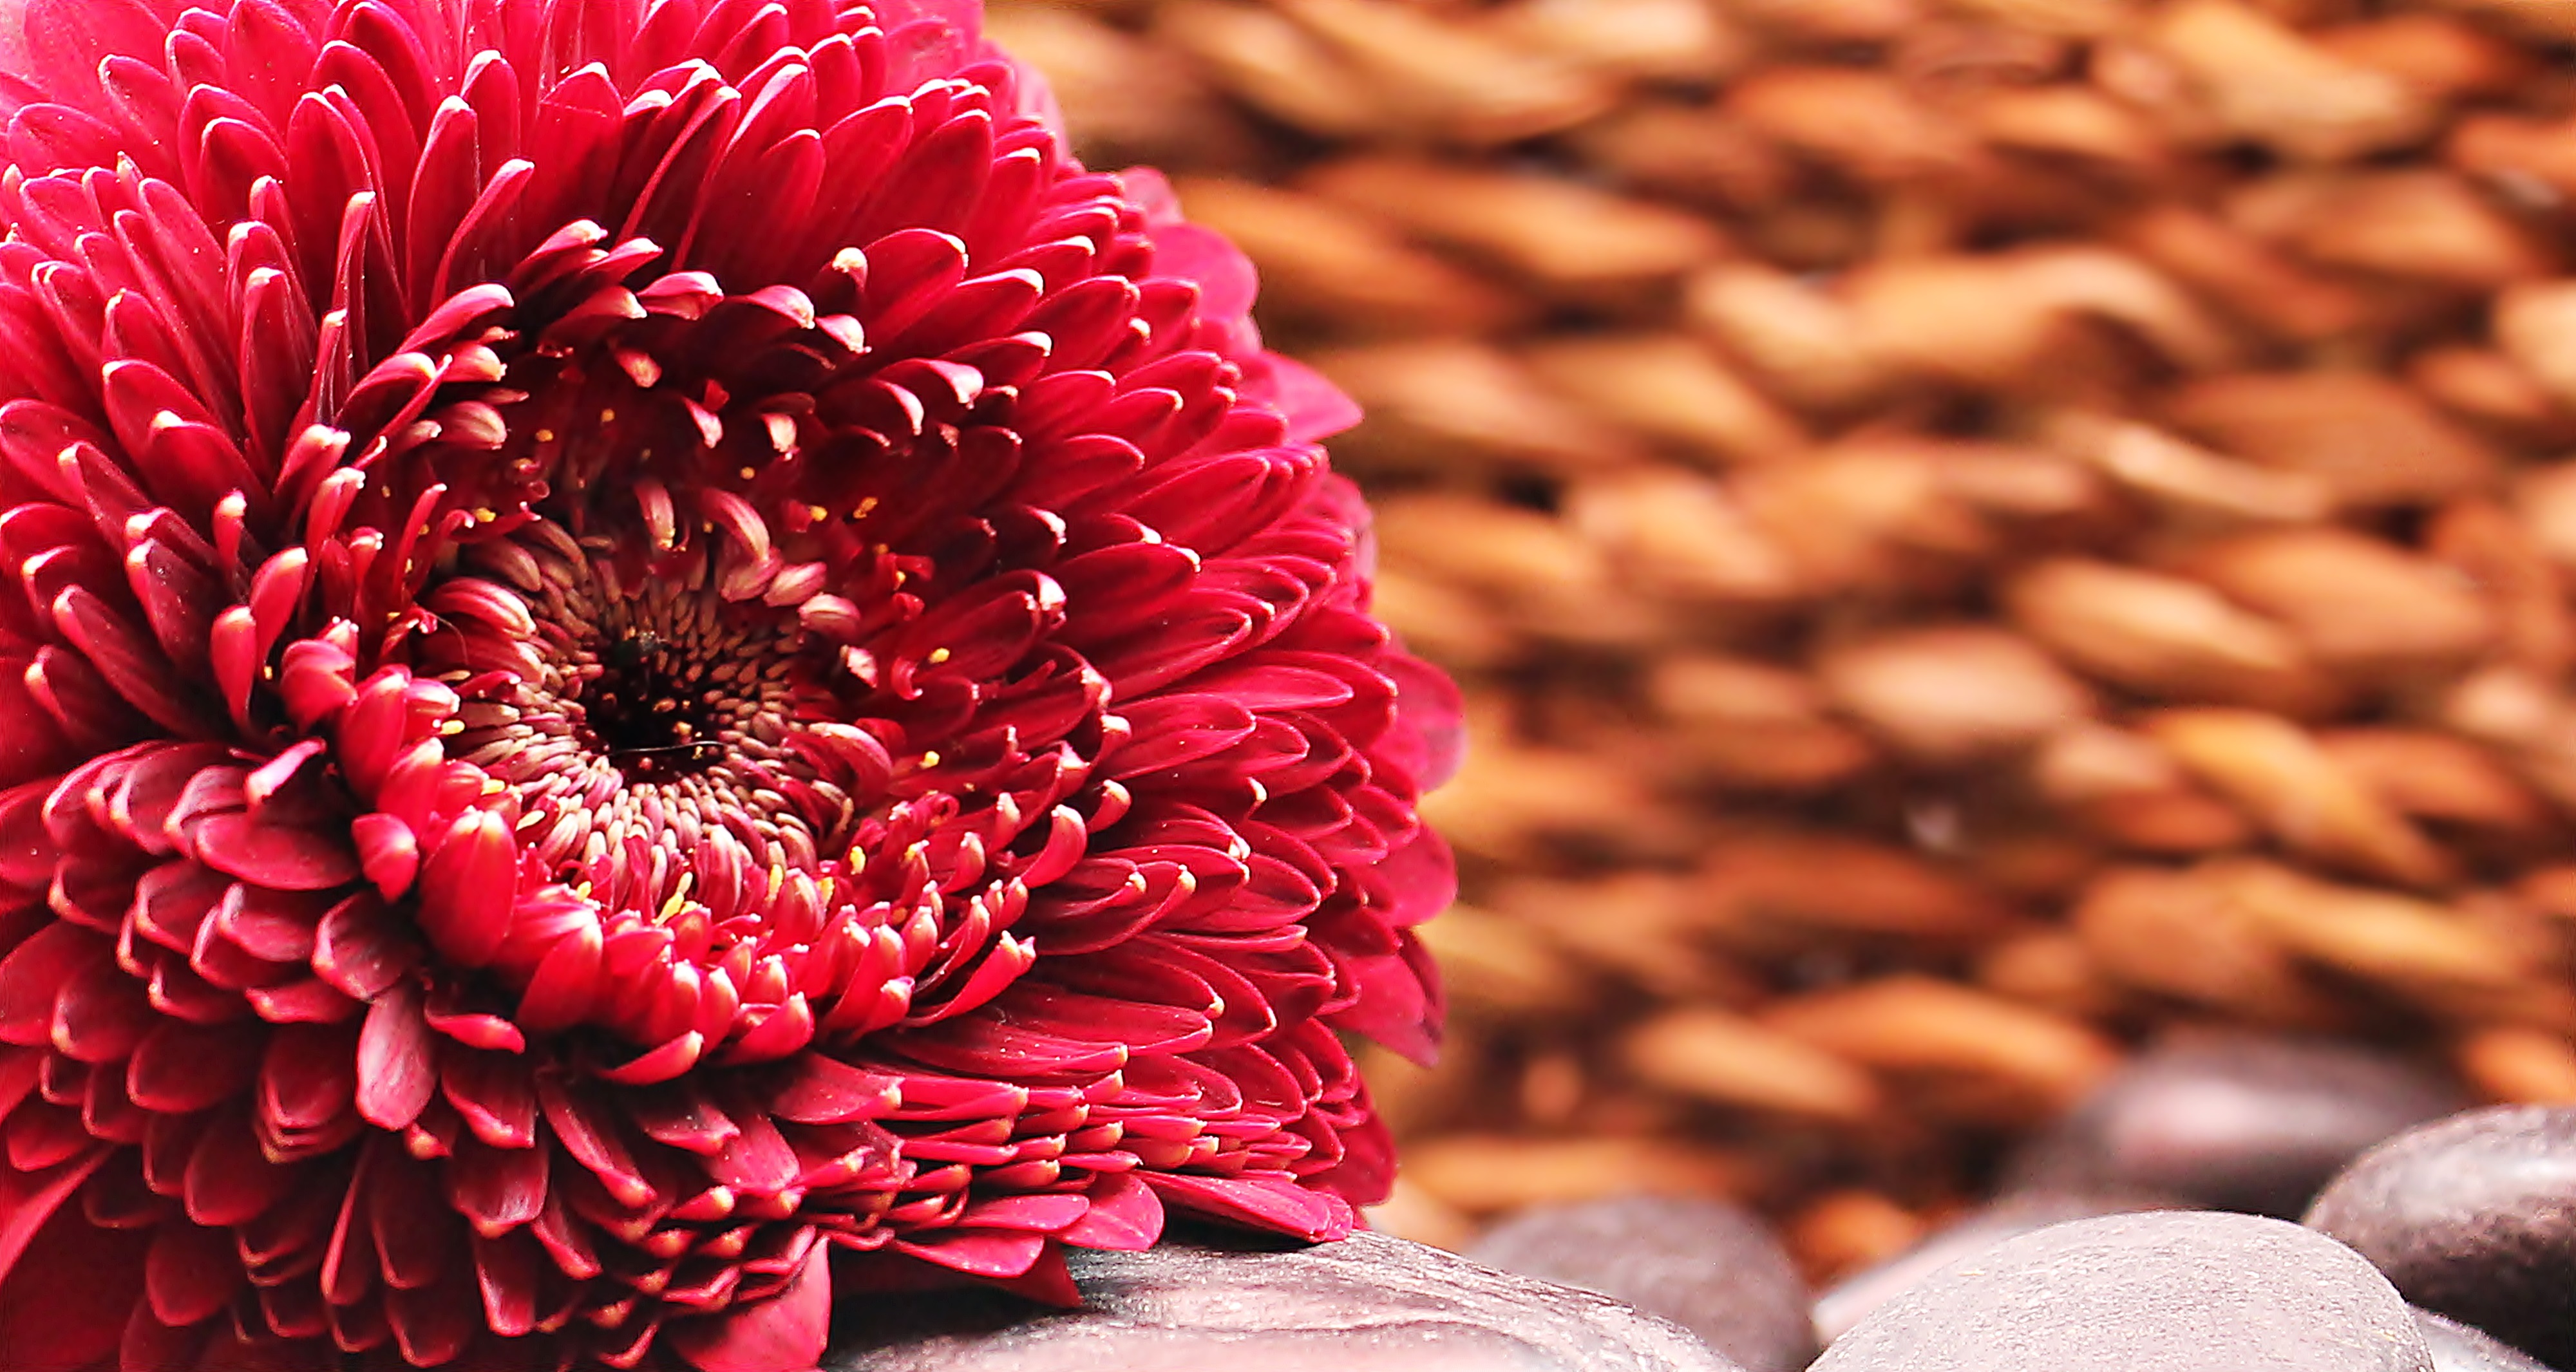 156601 download wallpaper flowers, flower, petals, bud, gerbera screensavers and pictures for free